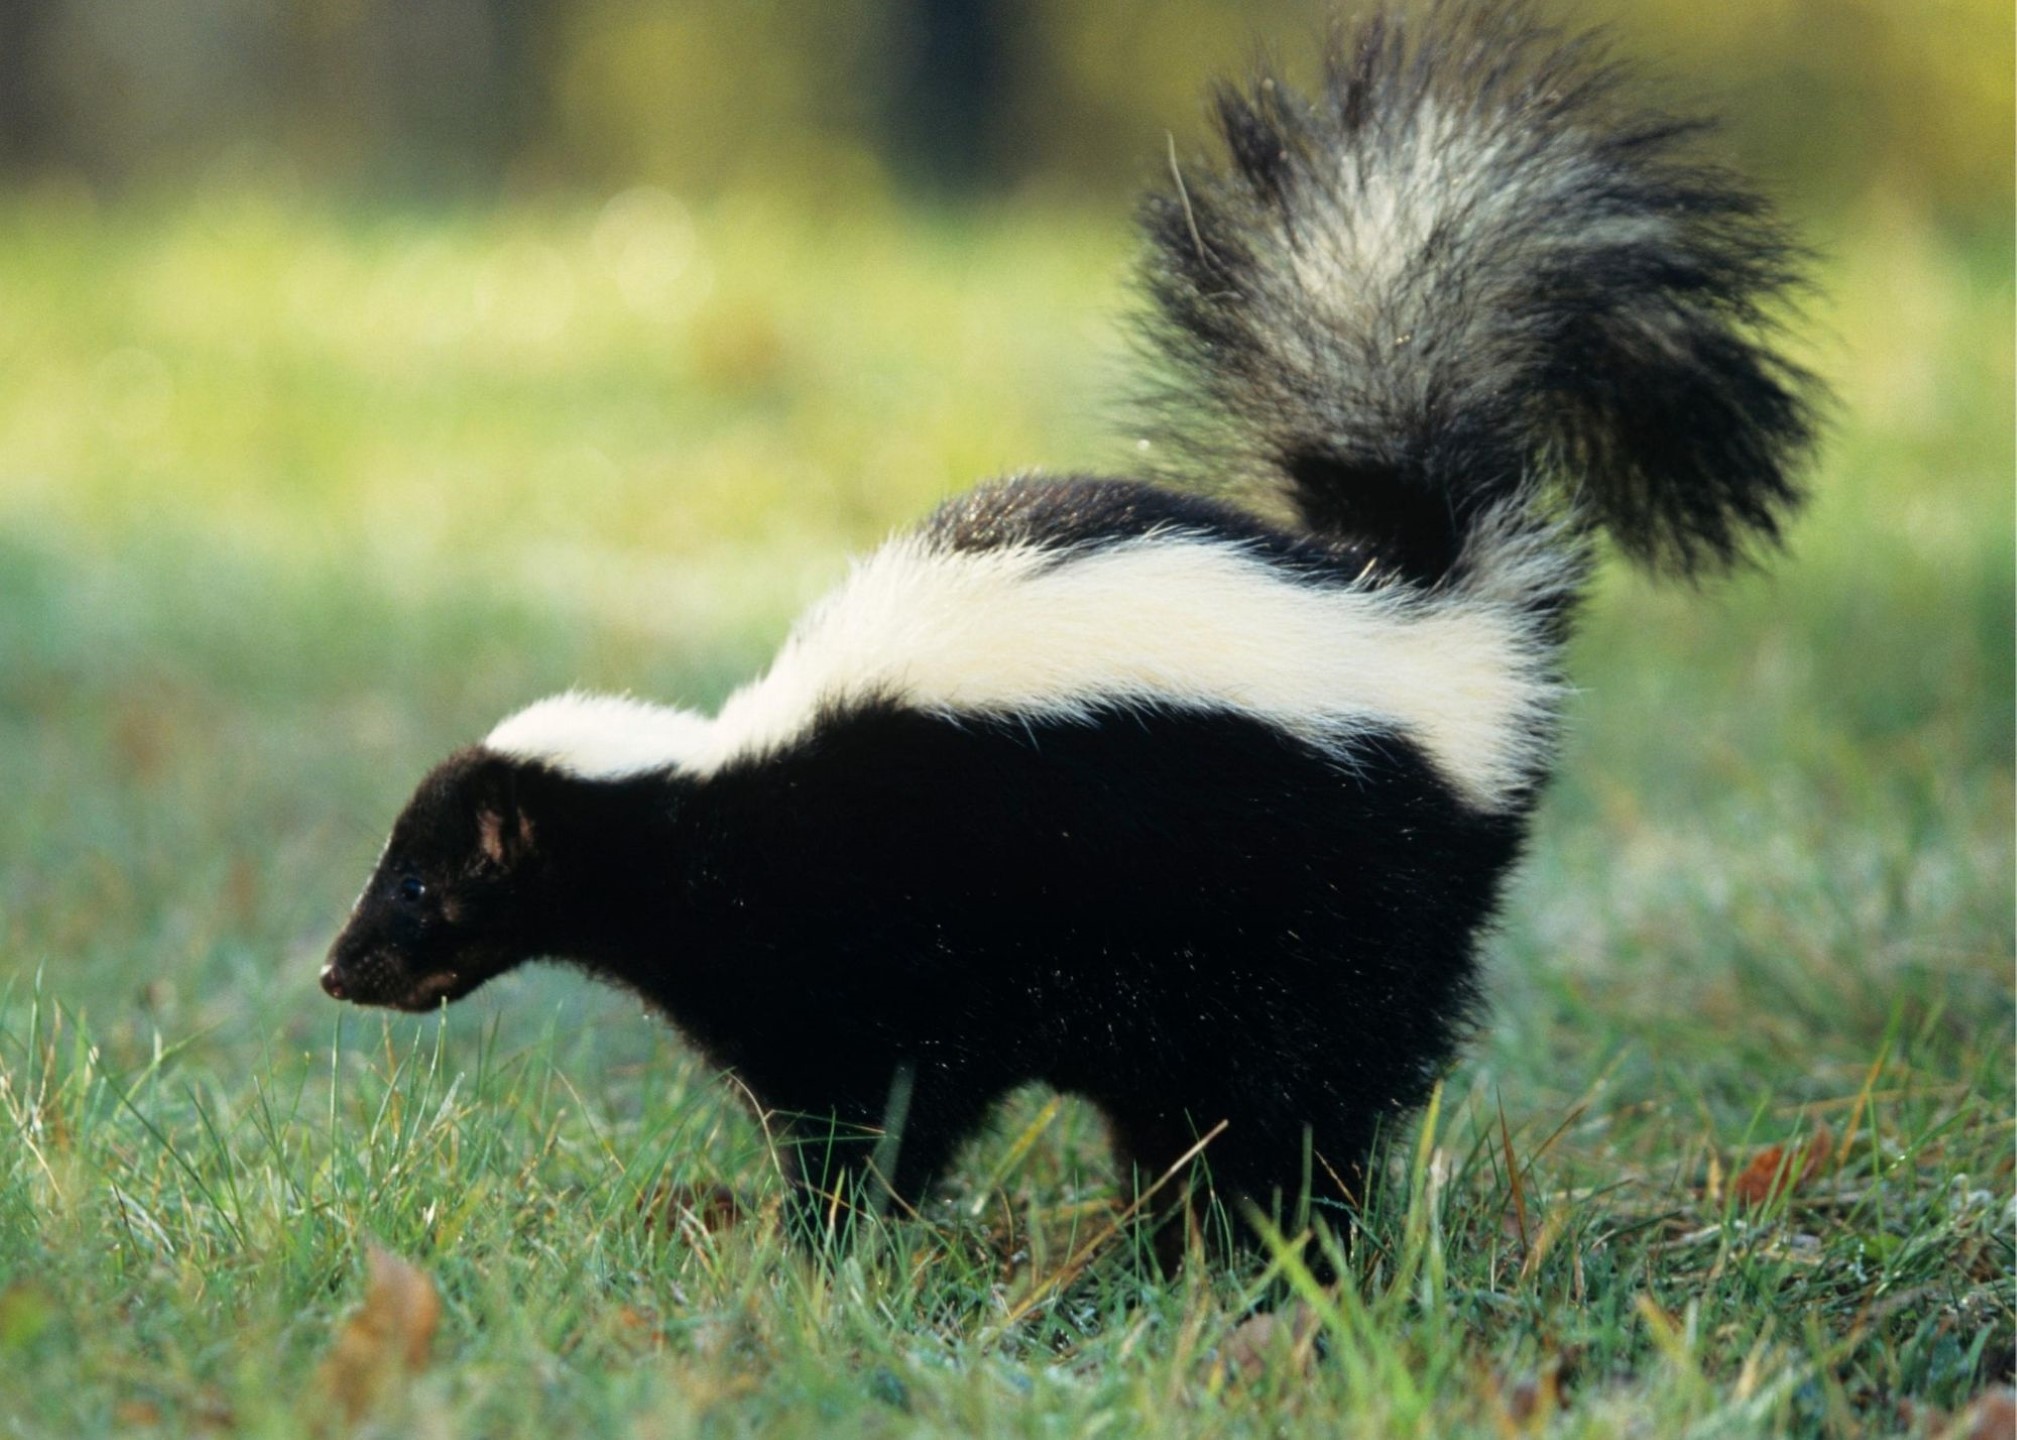 VIDEO: Lollipop the Skunk Combats Boredom By Painting